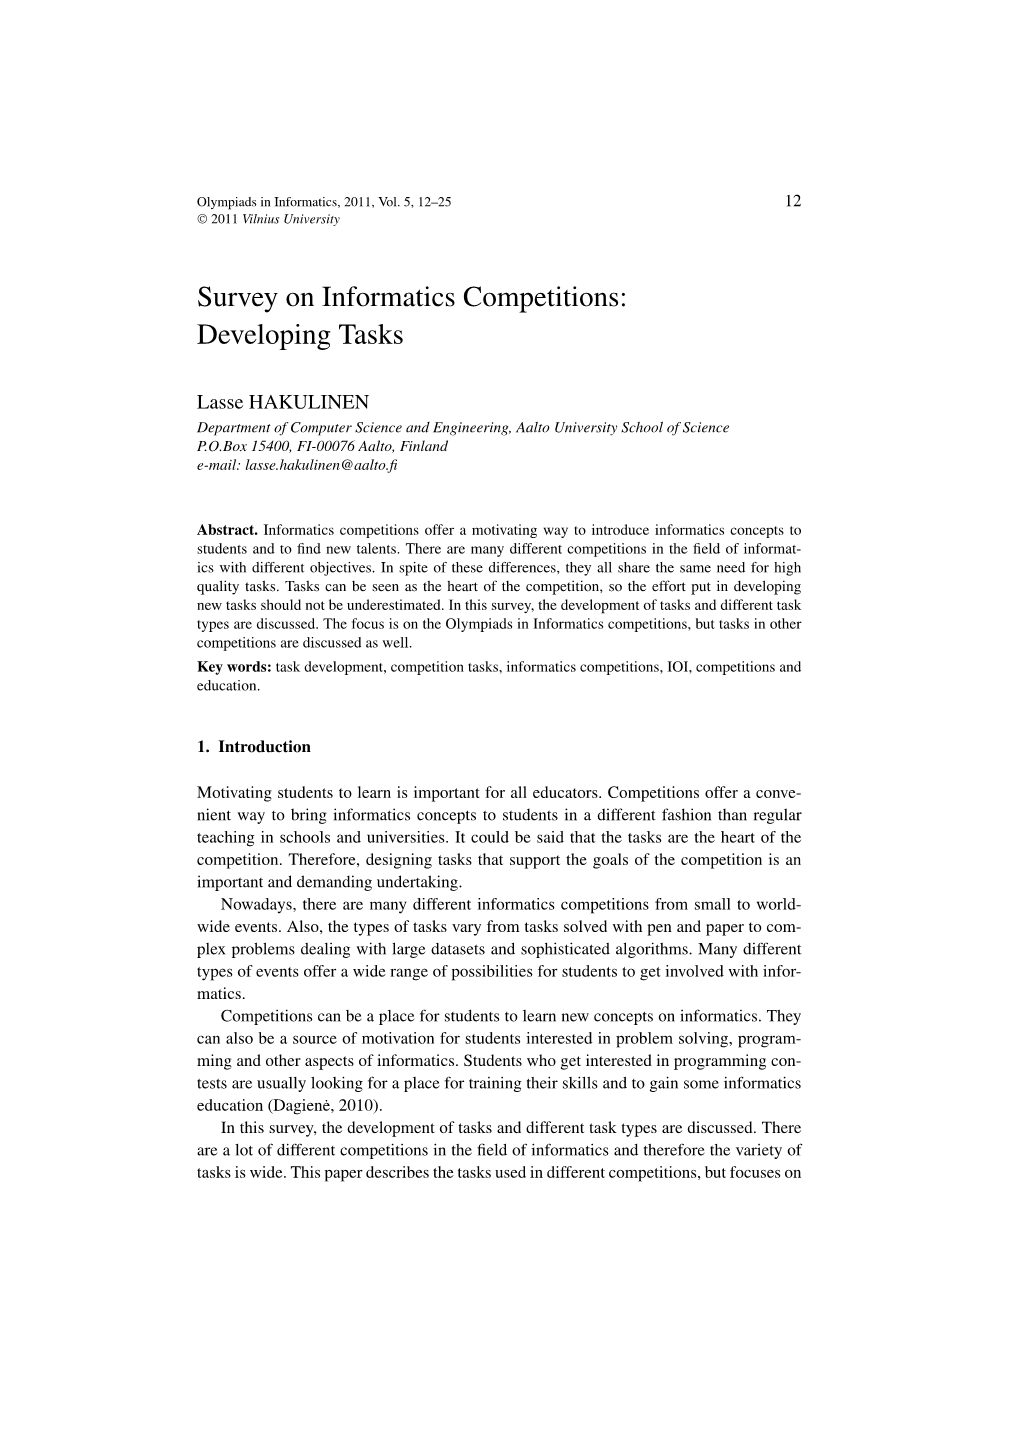 Survey on Informatics Competitions: Developing Tasks